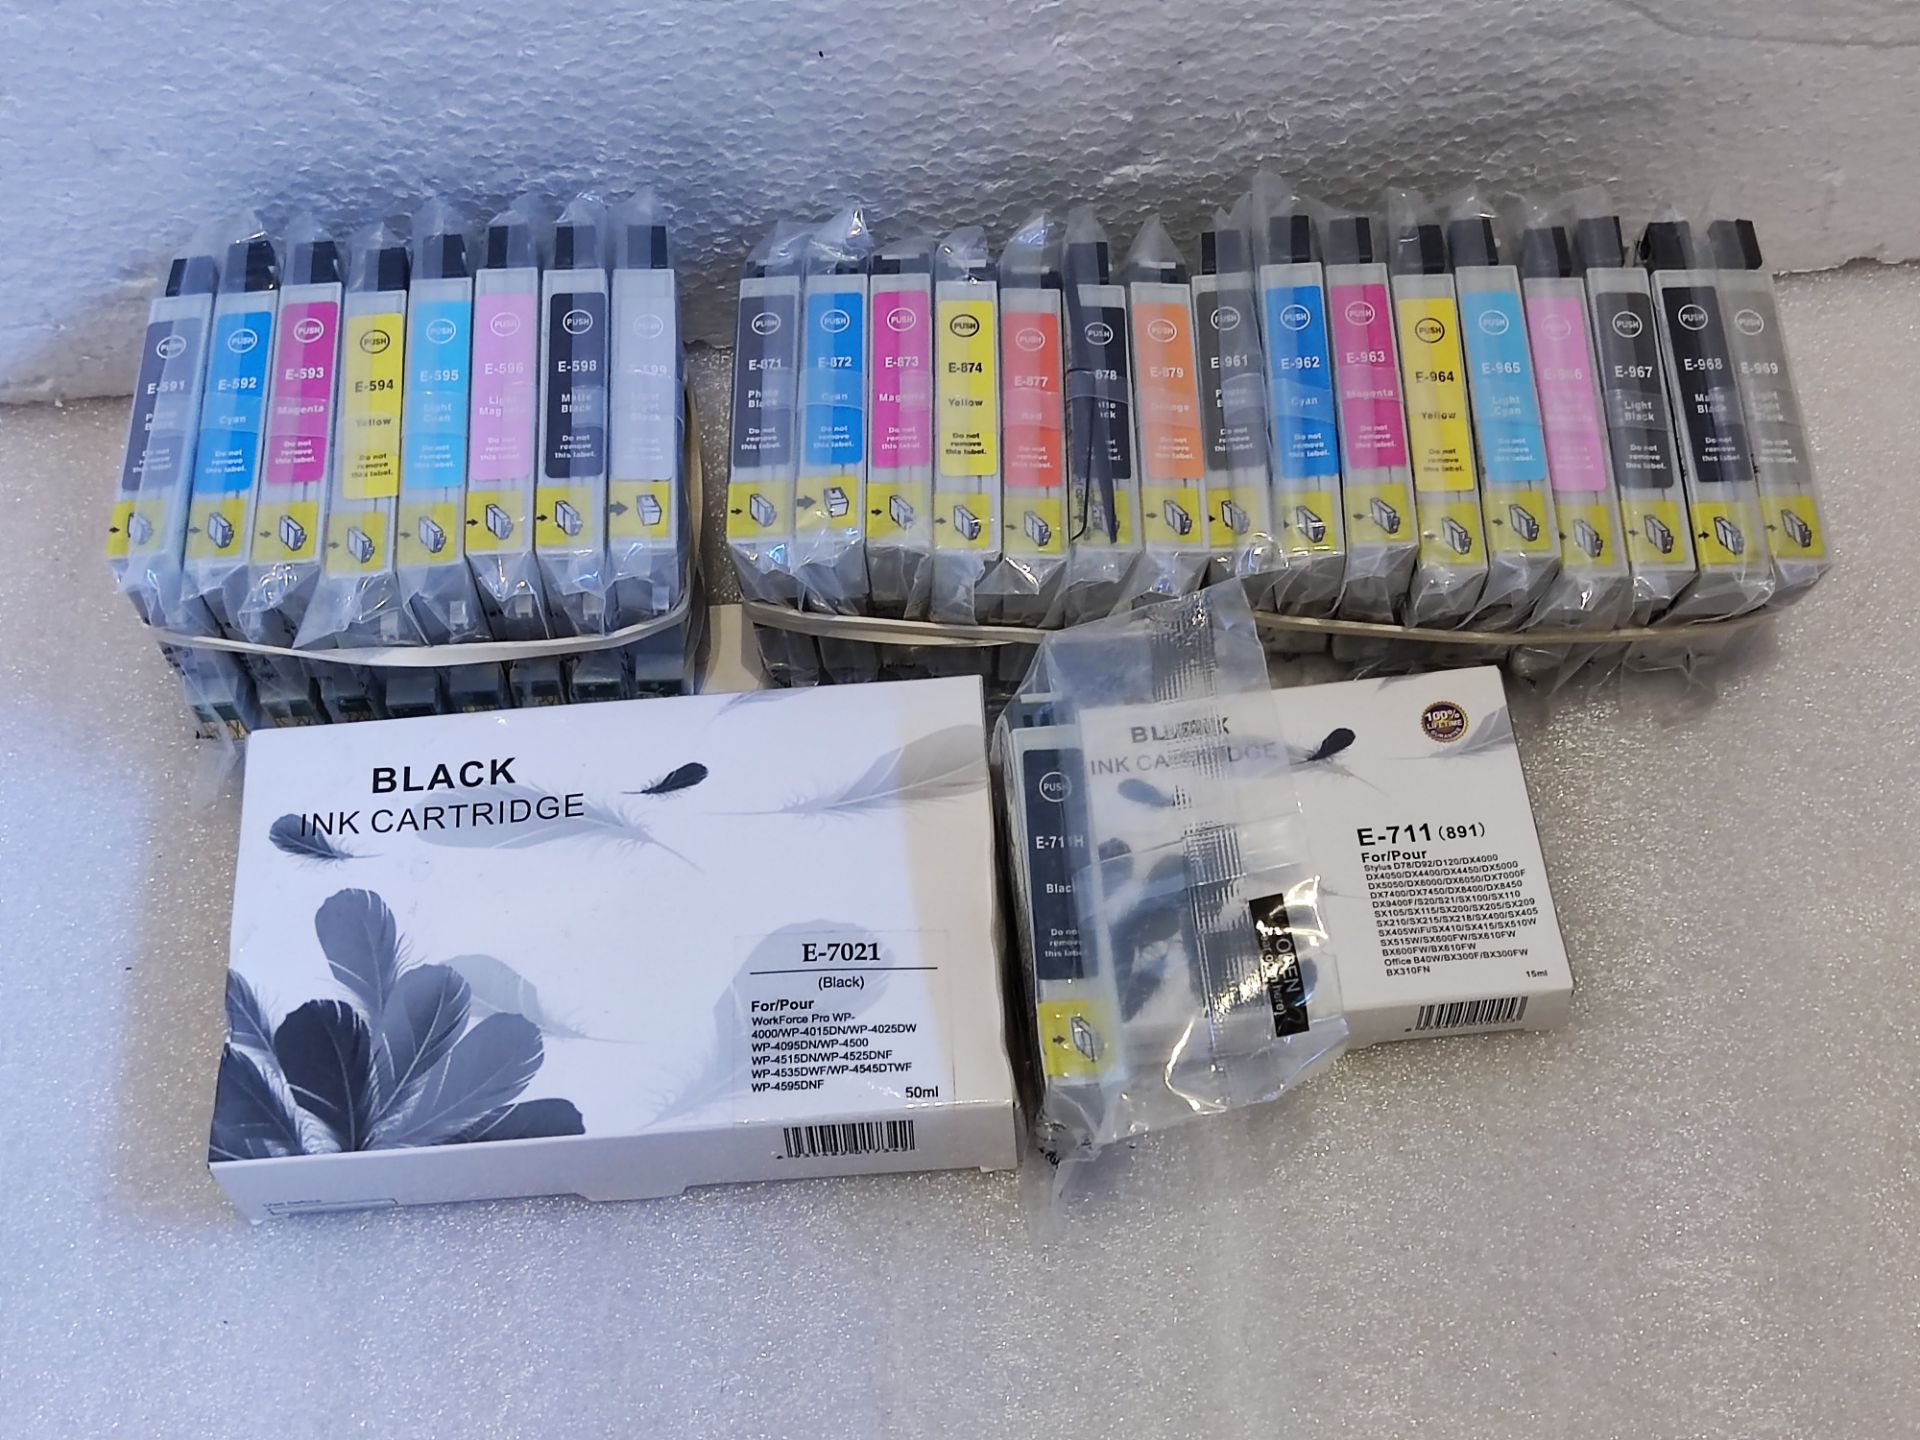 100 Packs of EPSON Replacement Ink Cartridges for Various Models + Different Colours - All New - Image 3 of 3